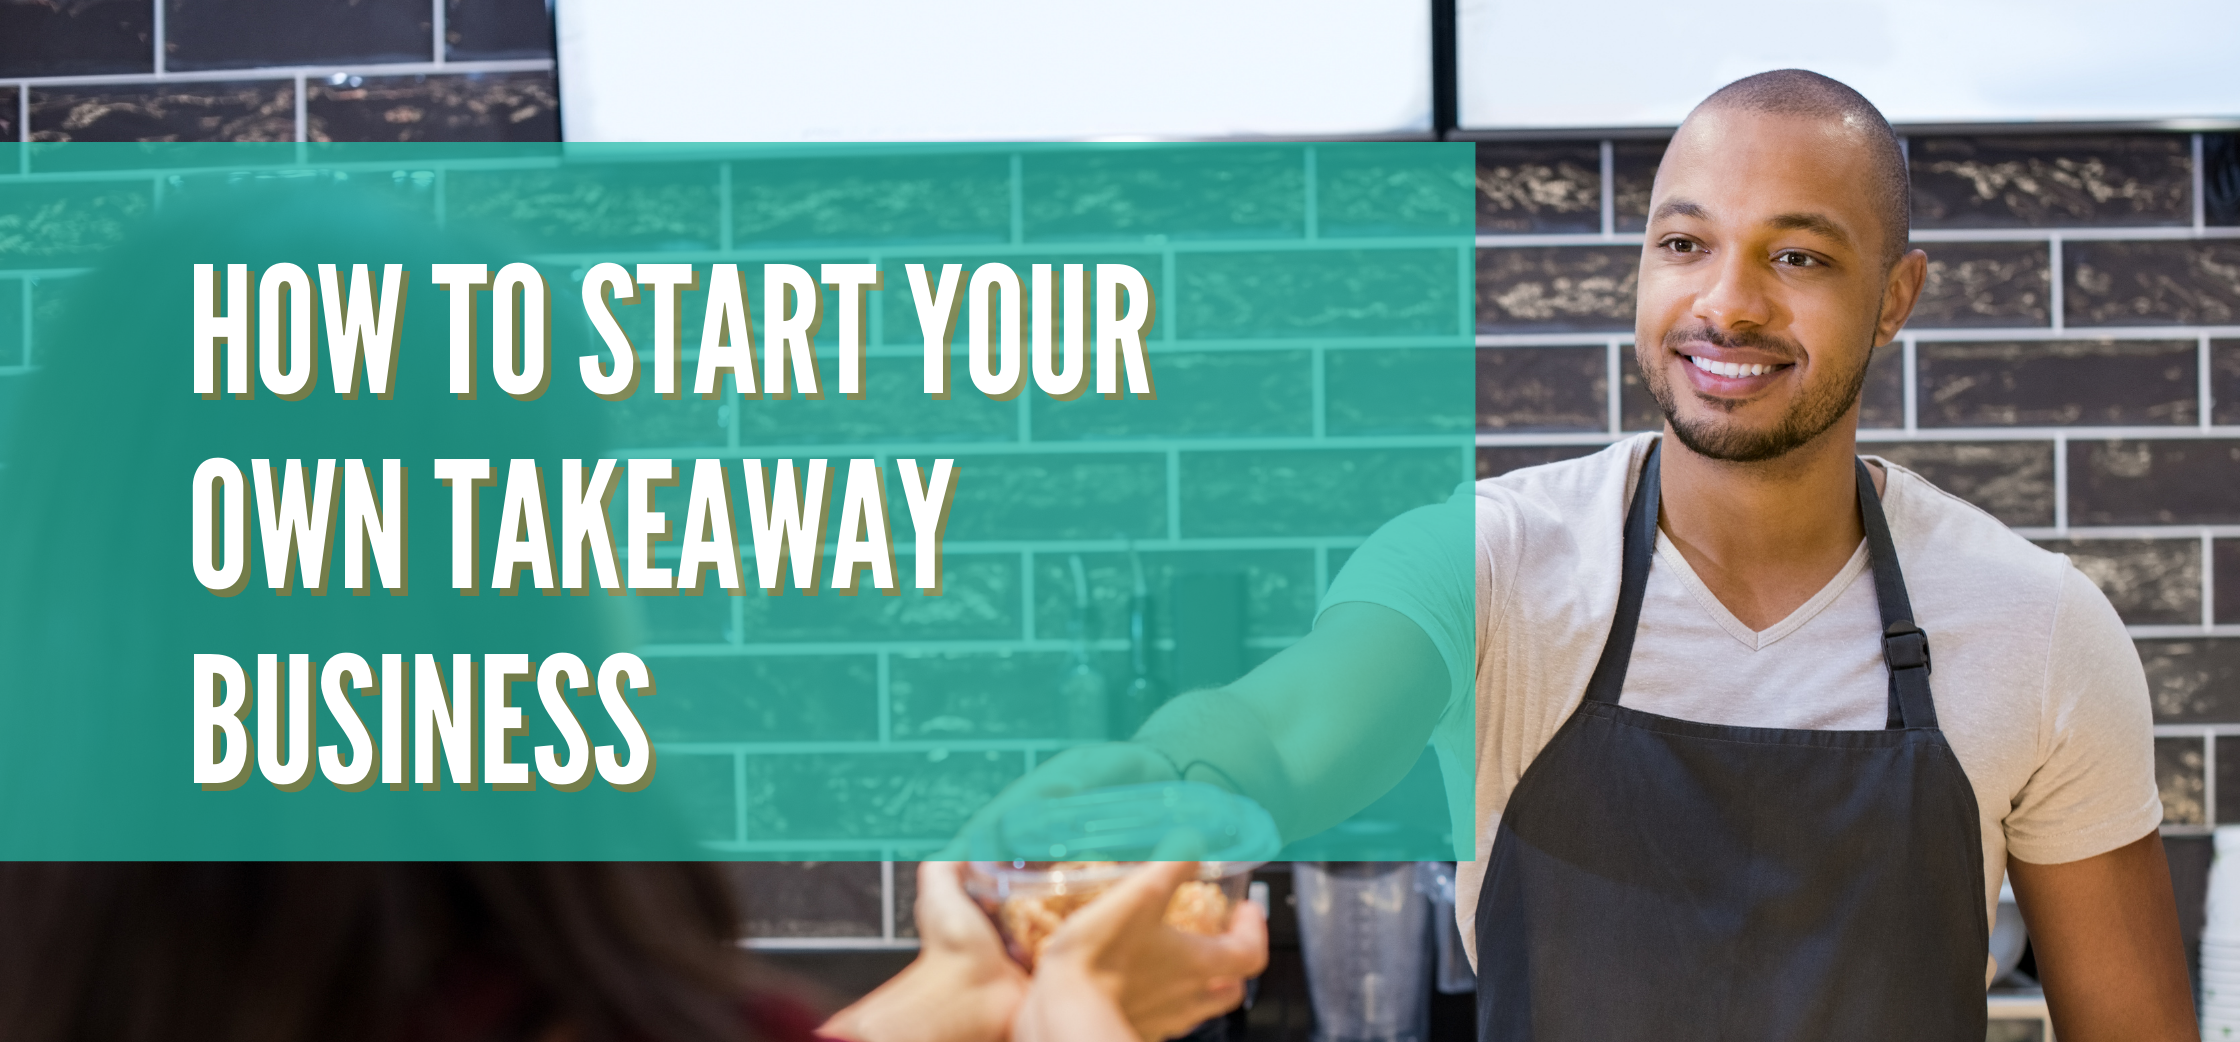 how-to-start-your-takeaway-business